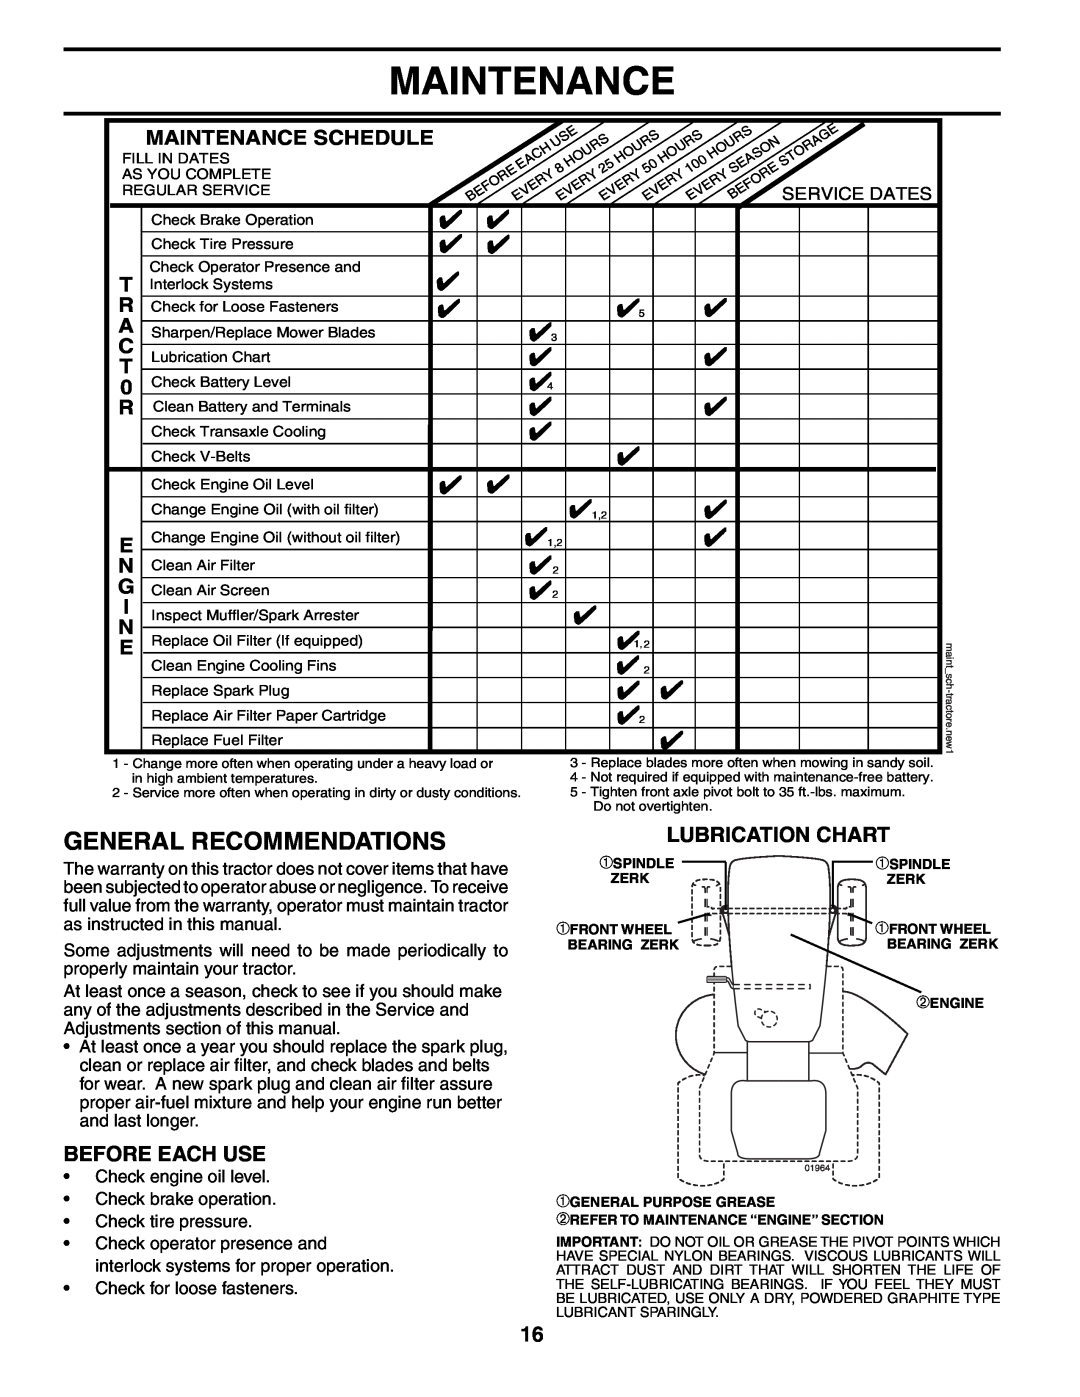 Poulan 954570925, 186996 owner manual General Recommendations, Lubrication Chart, Before Each Use, Maintenance Schedule 